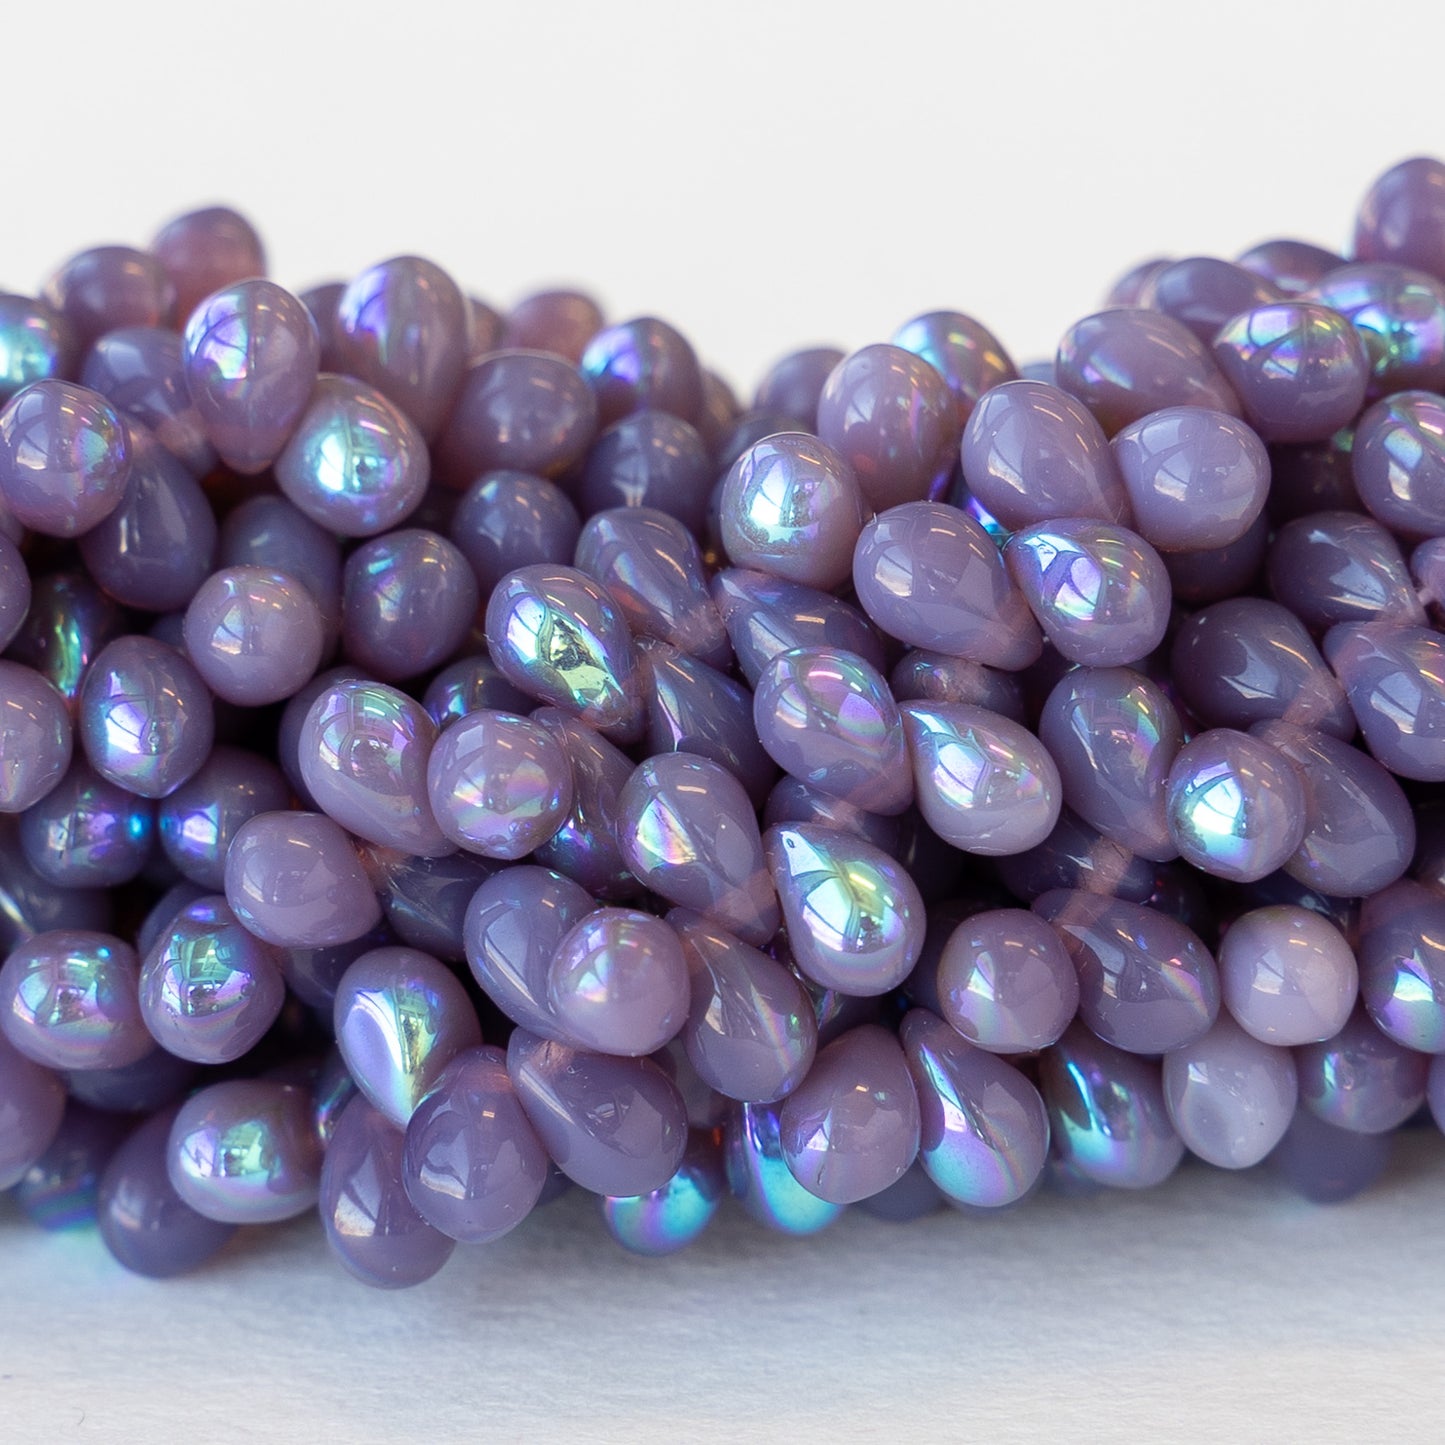 4x6mm Glass Teardrops - Opaque Lavender AB - 100 Beads